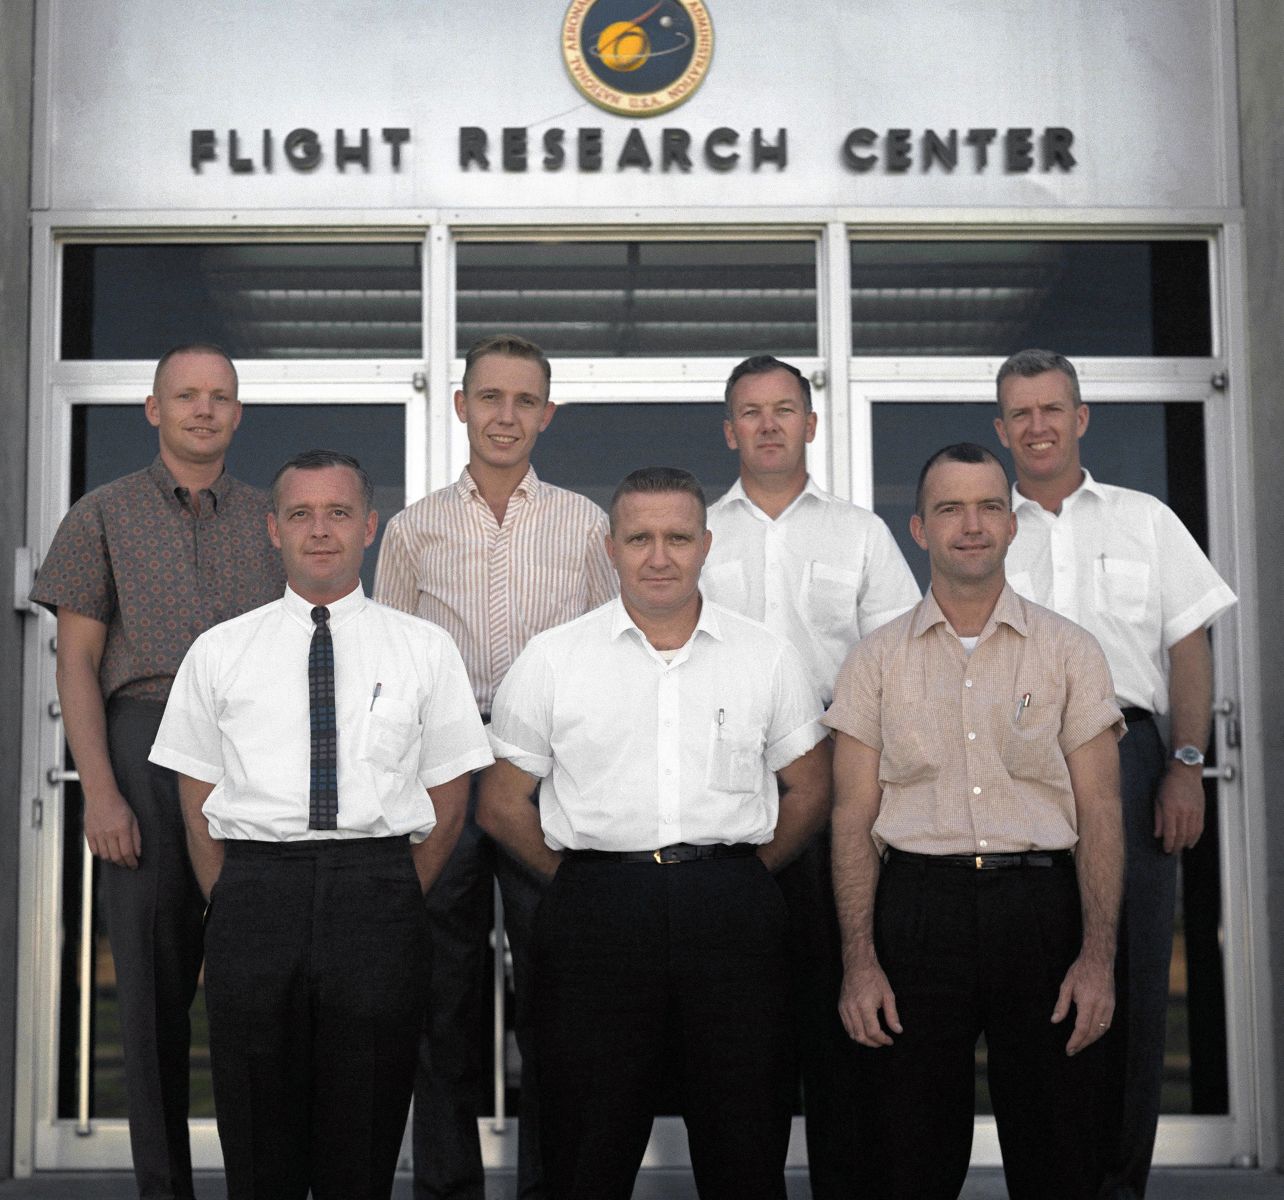 NASA research test pilot Bill Dana had been on the job at the Flight Research Center for less then four years of his 48-year career with NASA when this group photo of the center's test pilots was taken in 1962